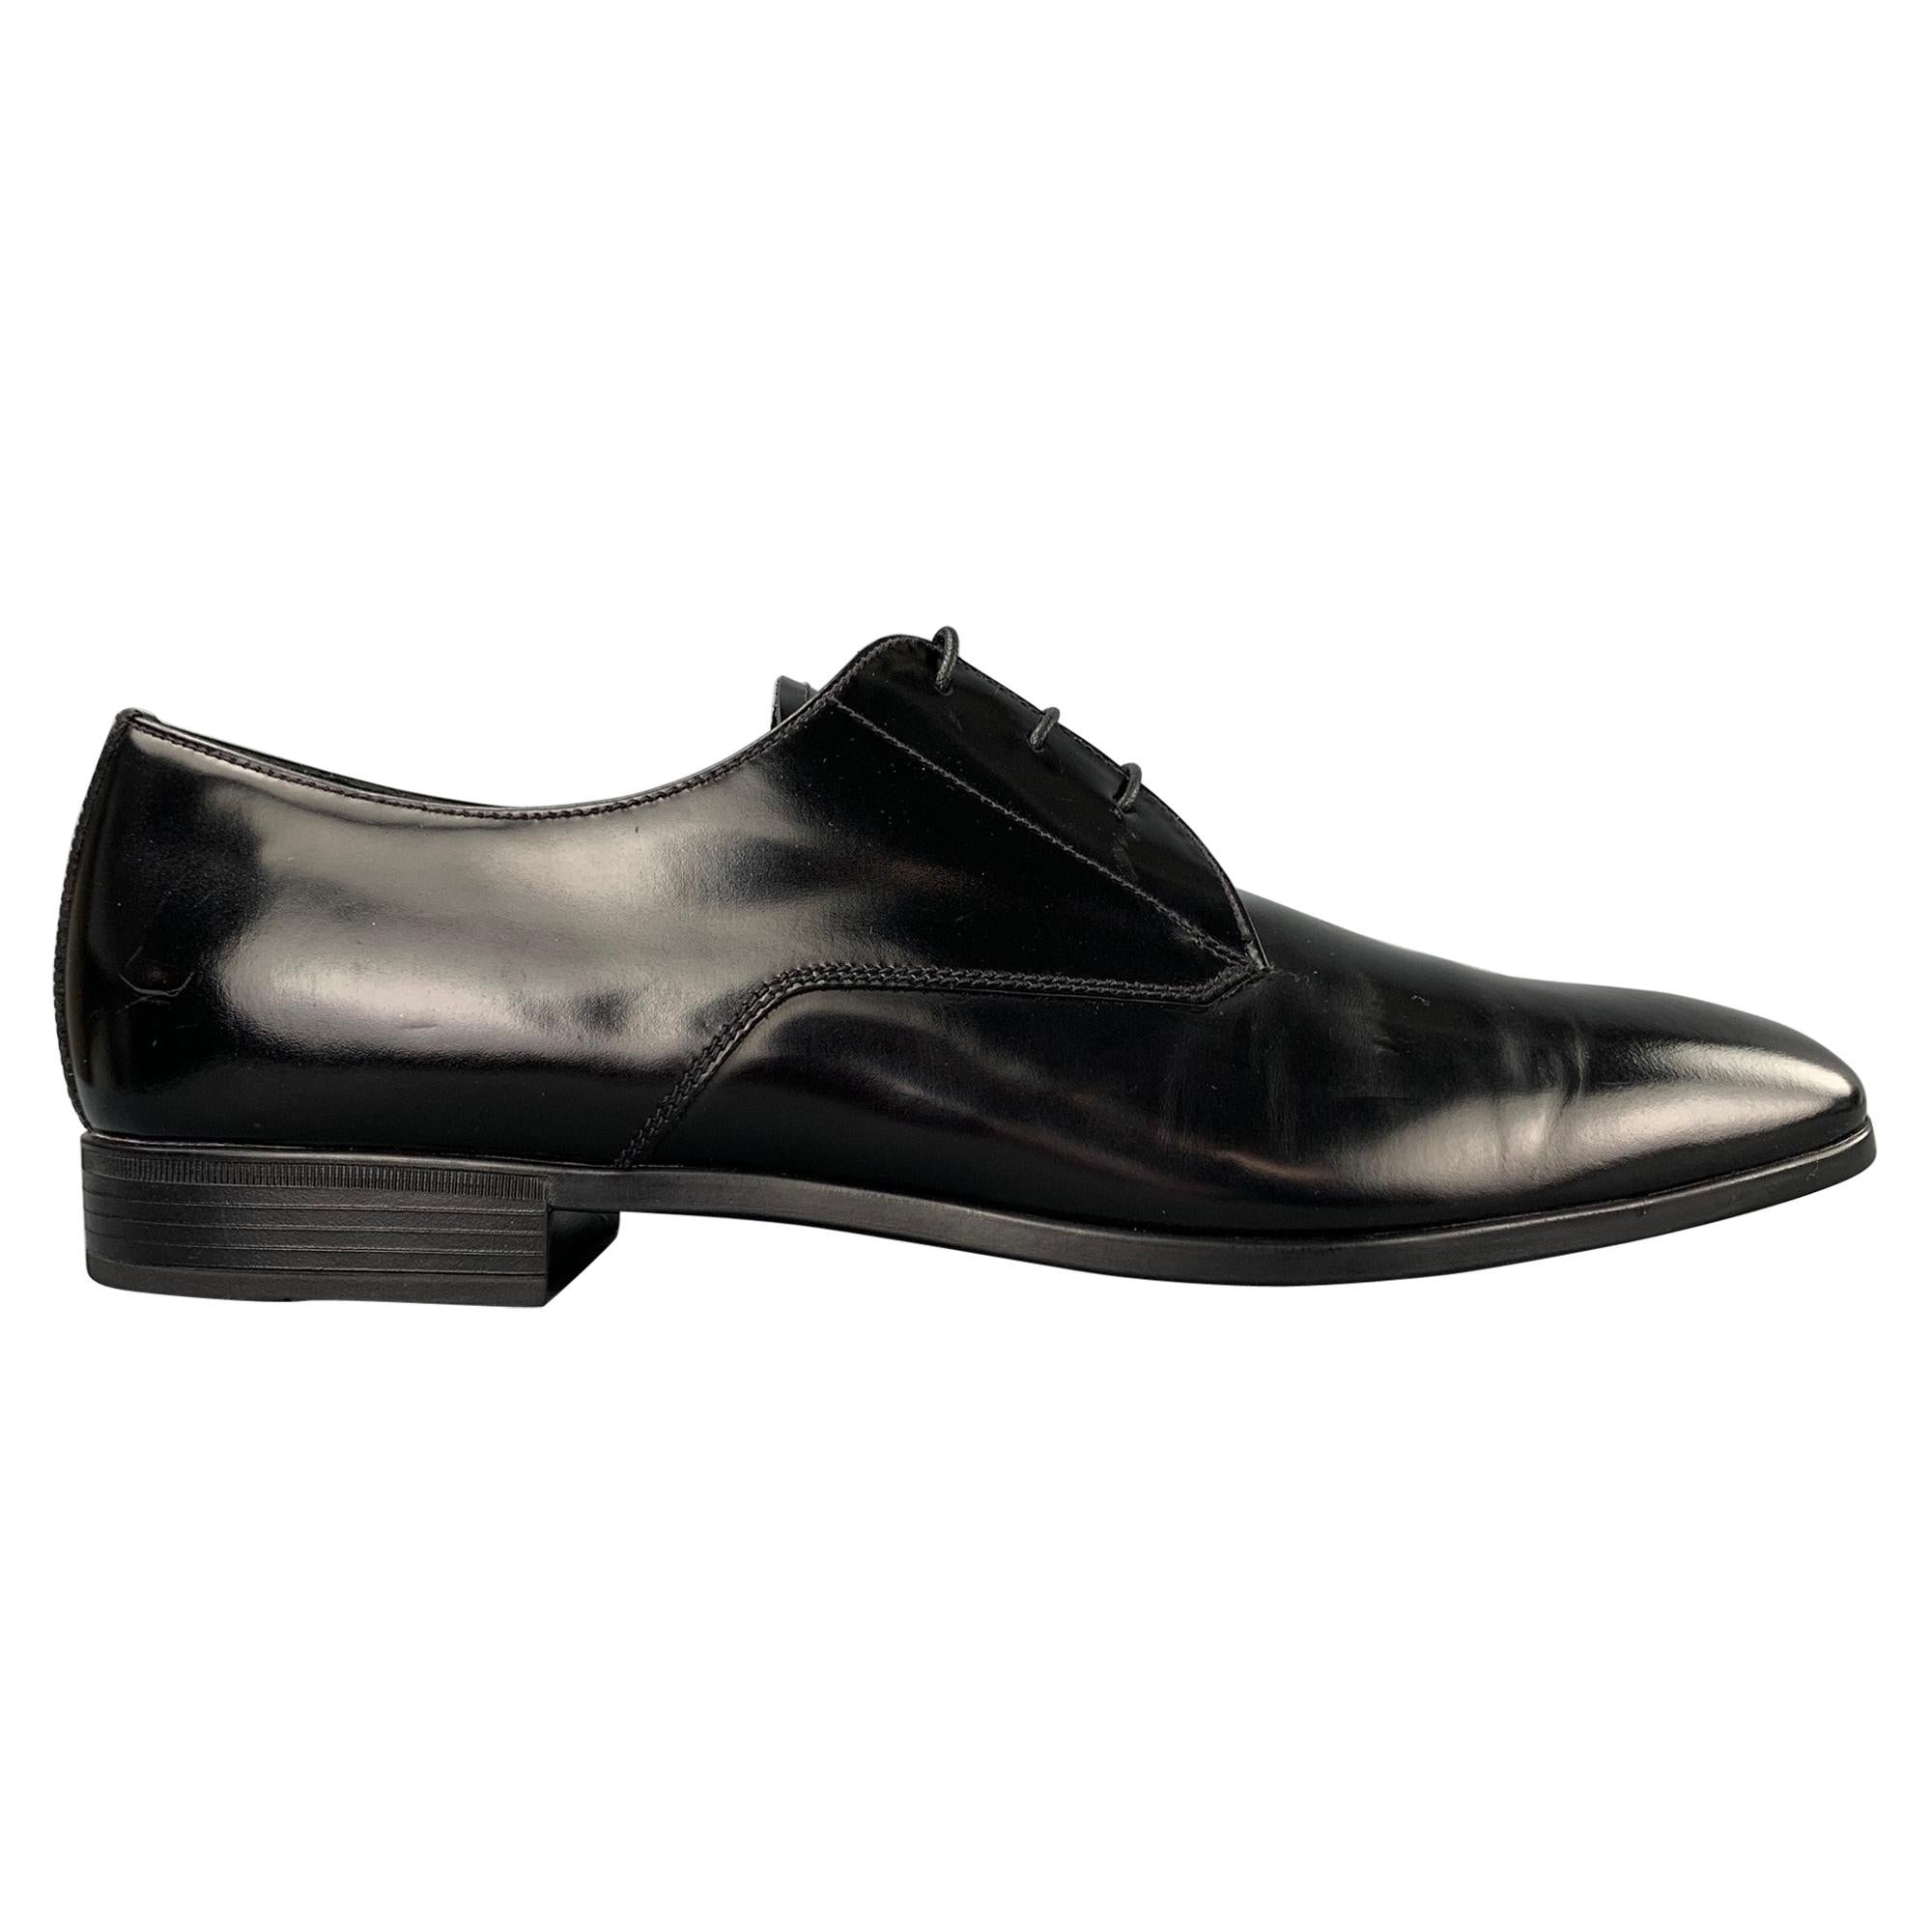 OES NEW PRADA Size 10 Black Leather Lace Up Dress Shoes